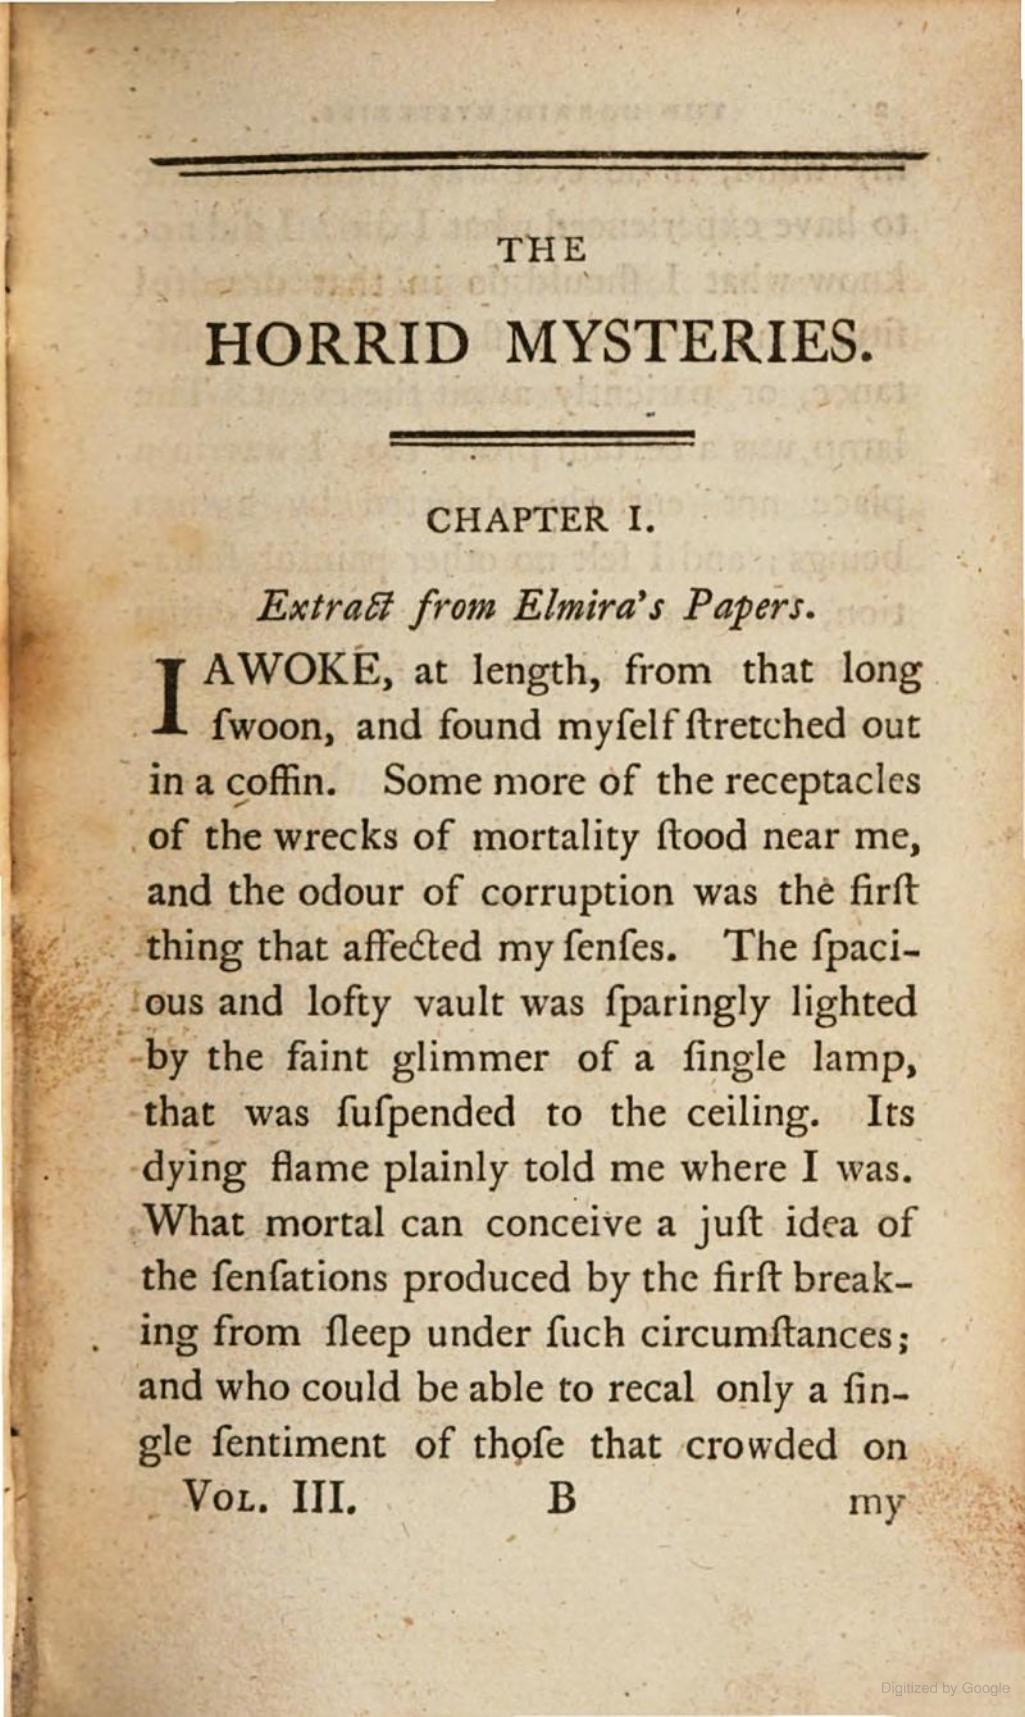 Horrid mysteries, 1796. Chapter 1, Page 1.